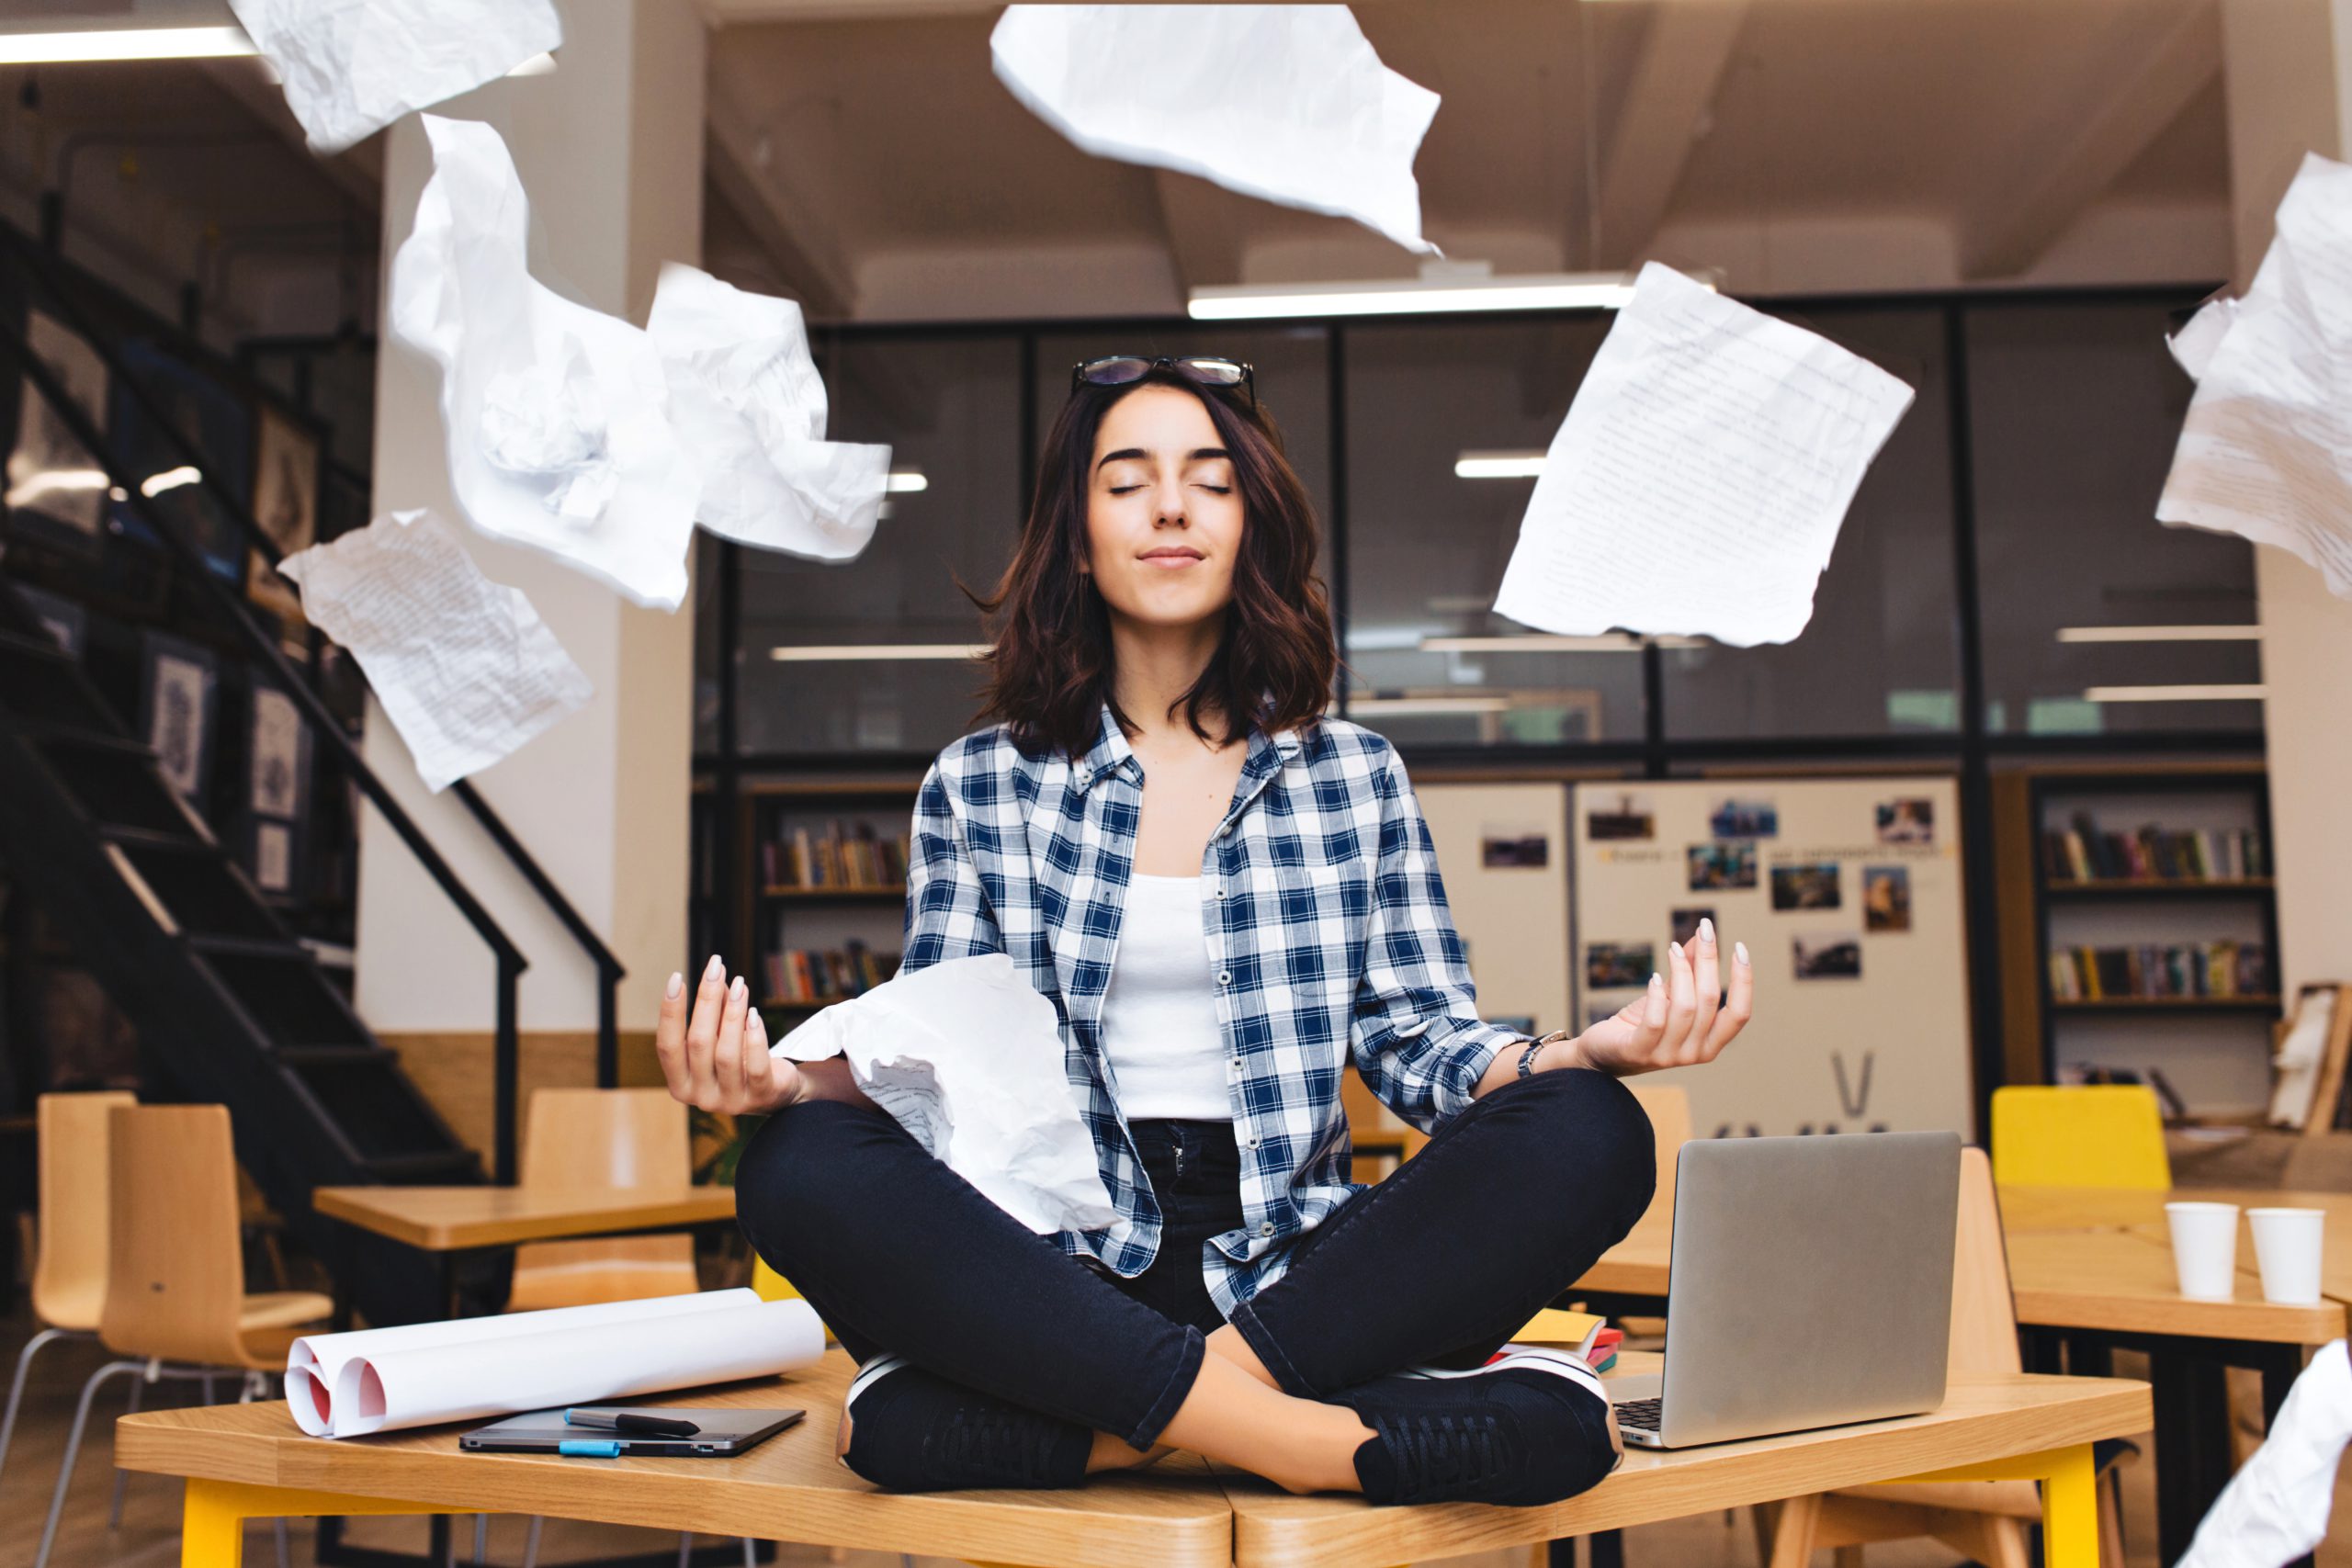 Young pretty joyful brunette woman meditating on table surround work stuff and flying papers. Cheerful mood, taking a break, working, studying, relaxation, true emotions.